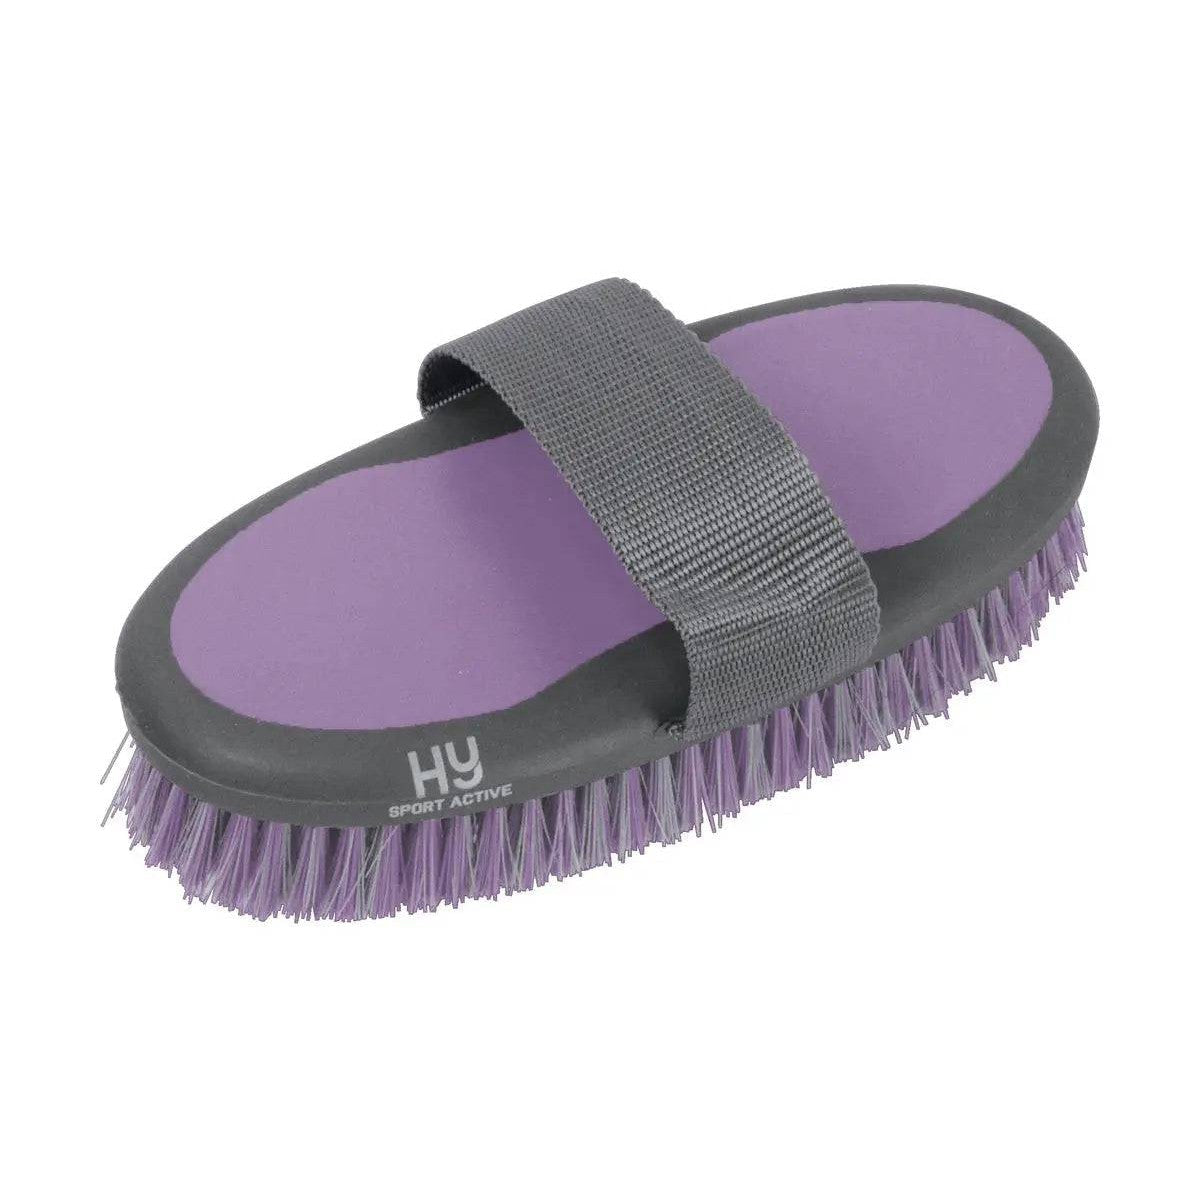 Hy Sport Active Groom Body Brush Blooming-Lilac Brushes & Combs Barnstaple Equestrian Supplies